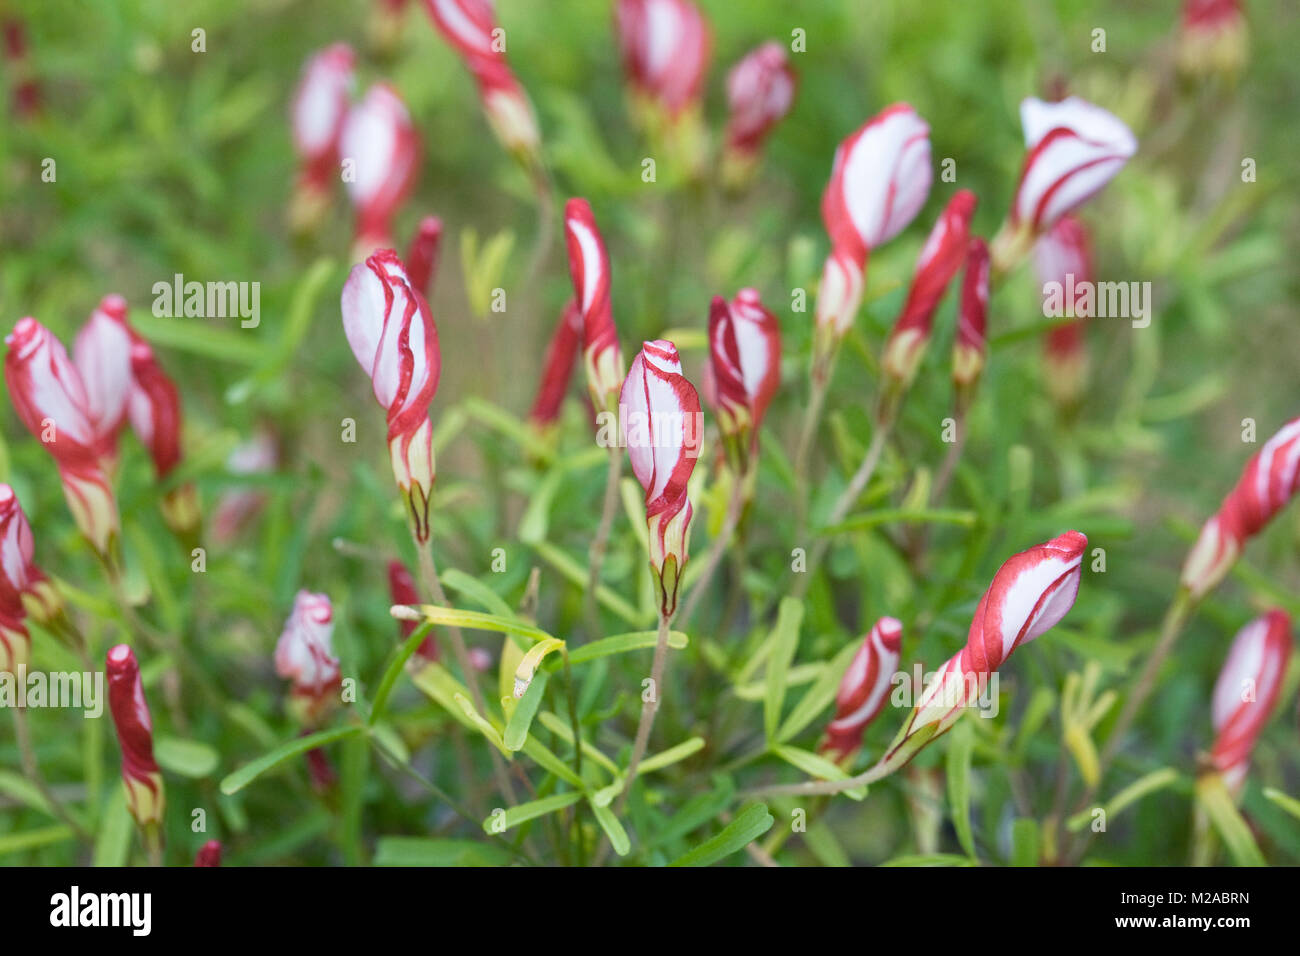 Oxalis versicolor flowers in a protected environment. Stock Photo